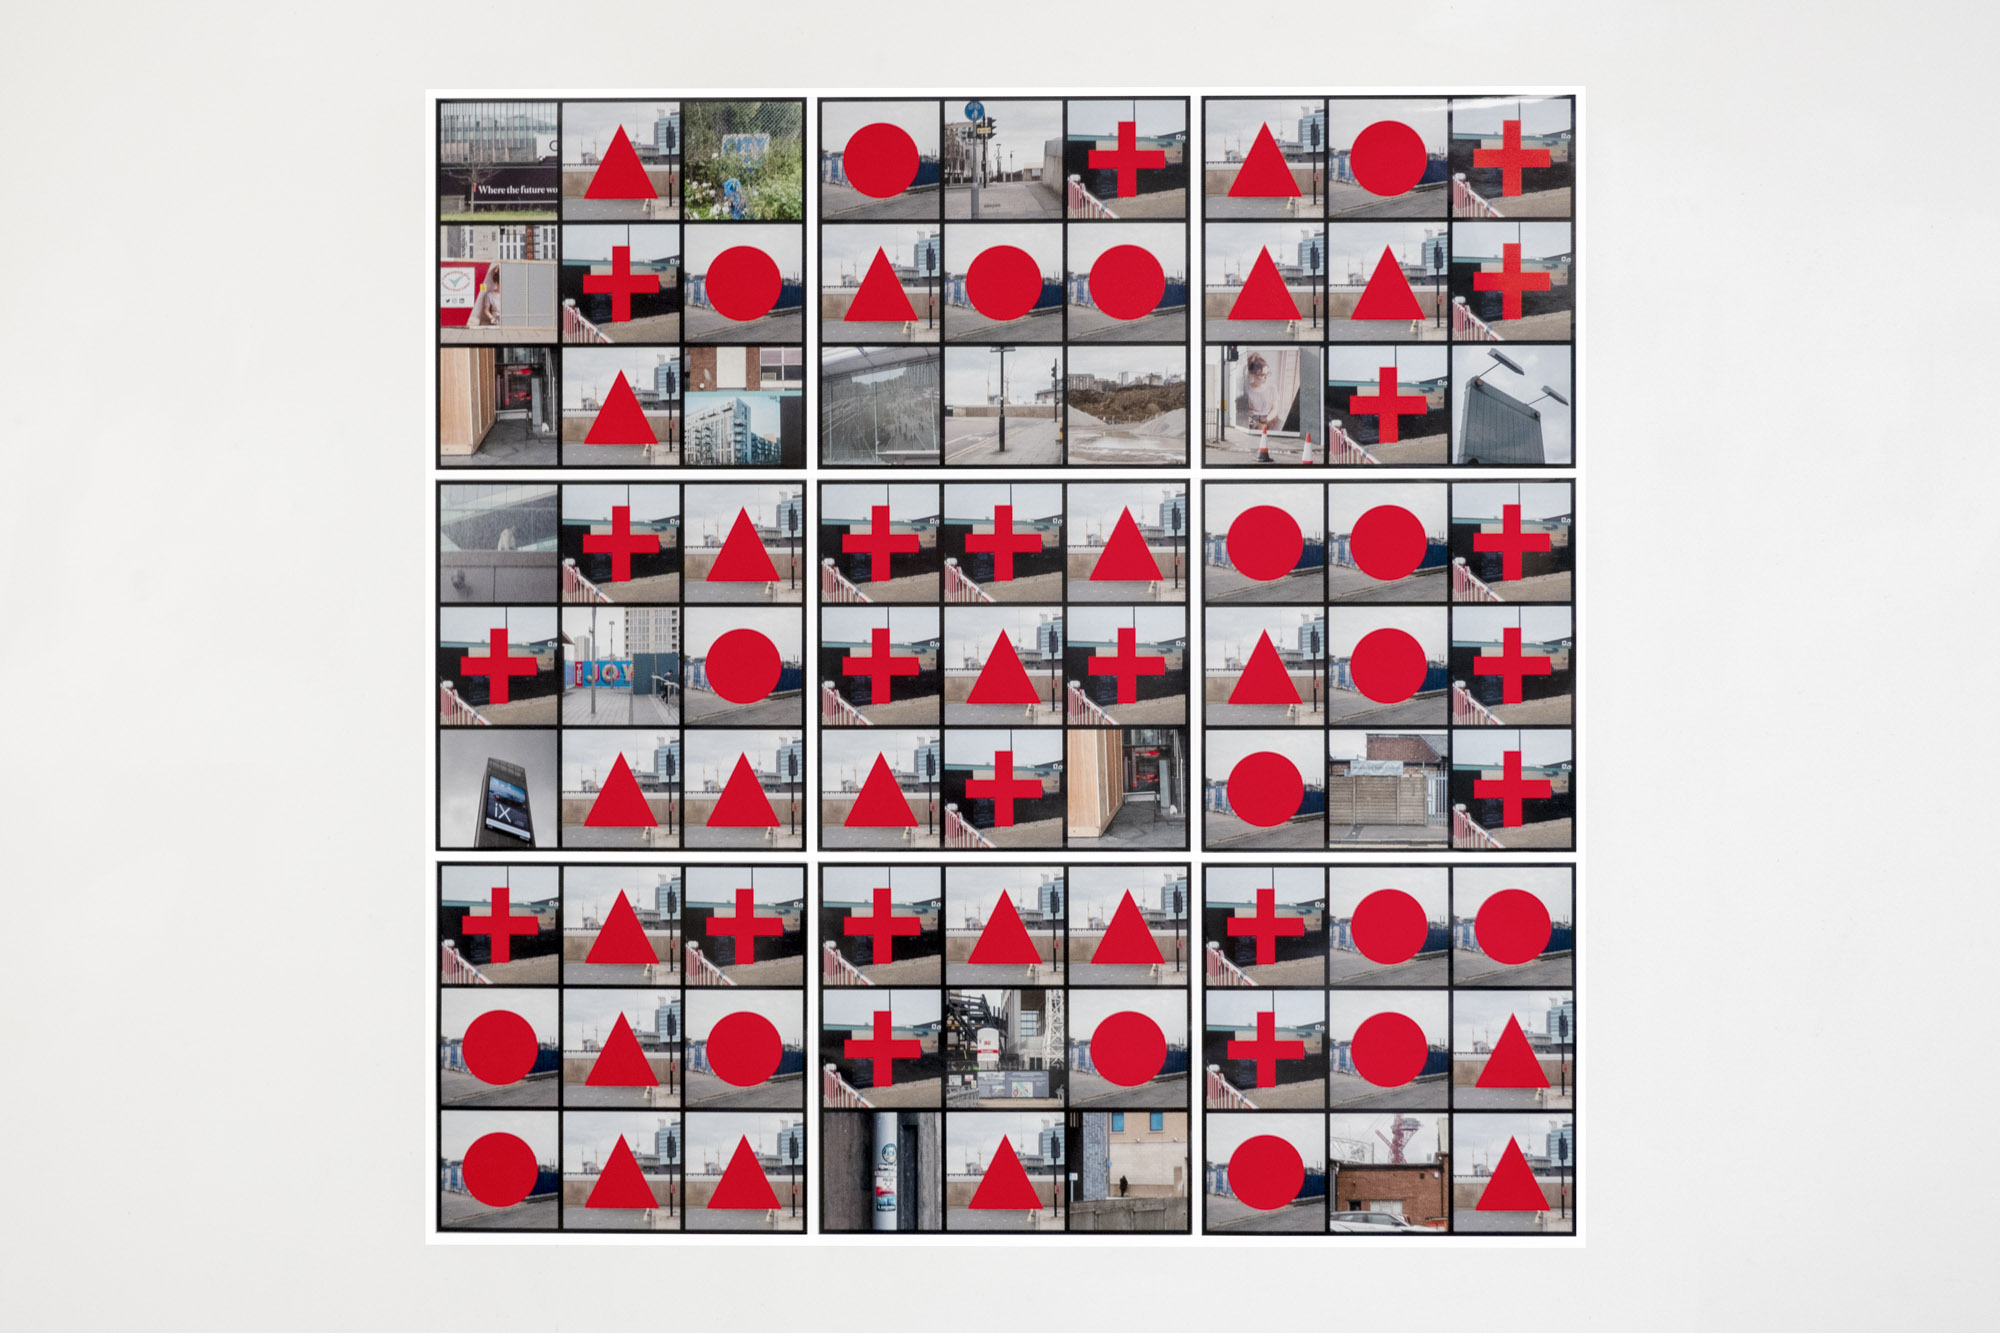 a square grid of images with red symbols obscuring many of them